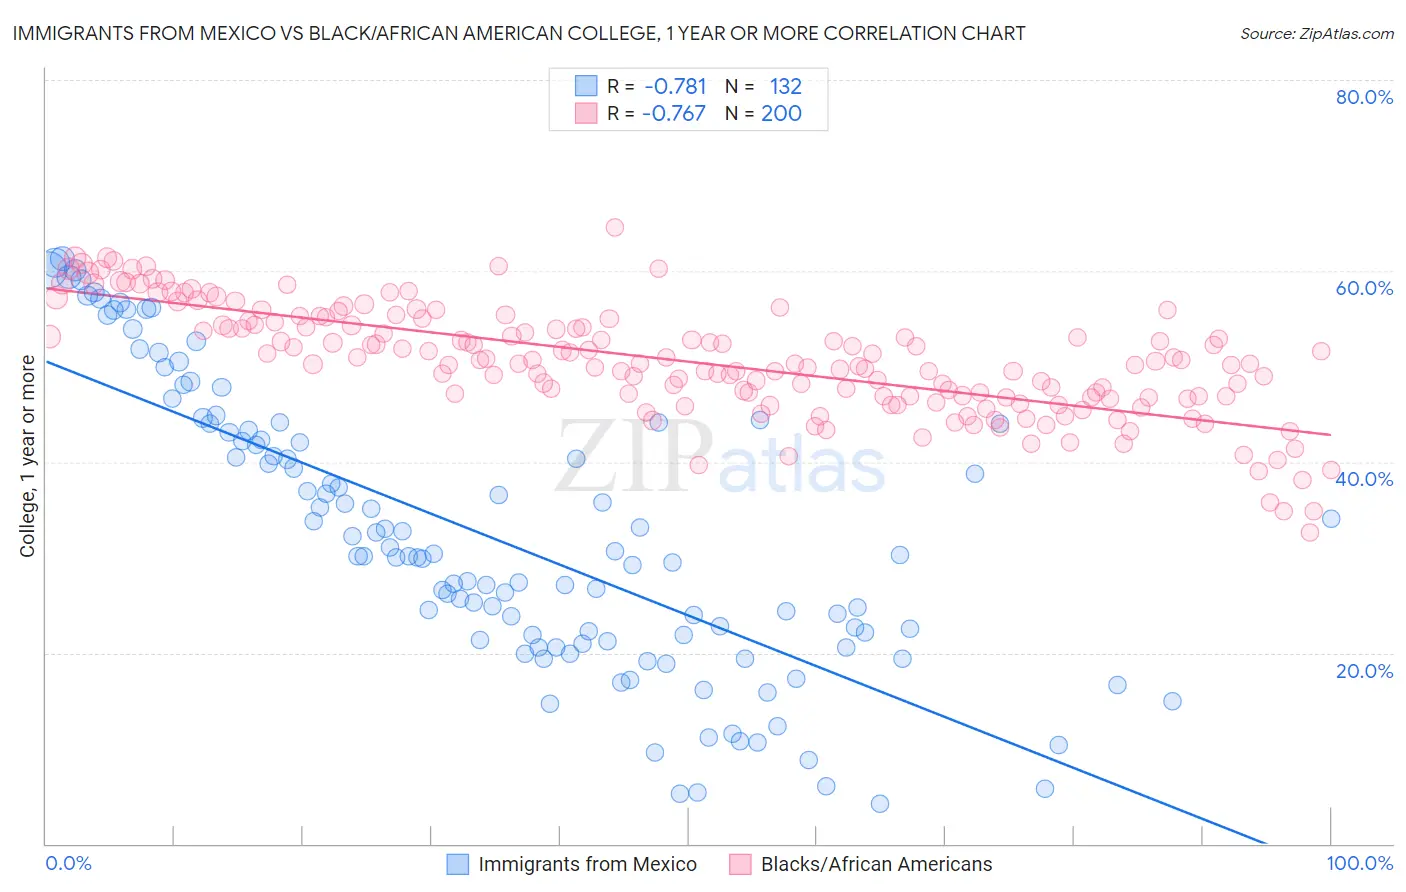 Immigrants from Mexico vs Black/African American College, 1 year or more